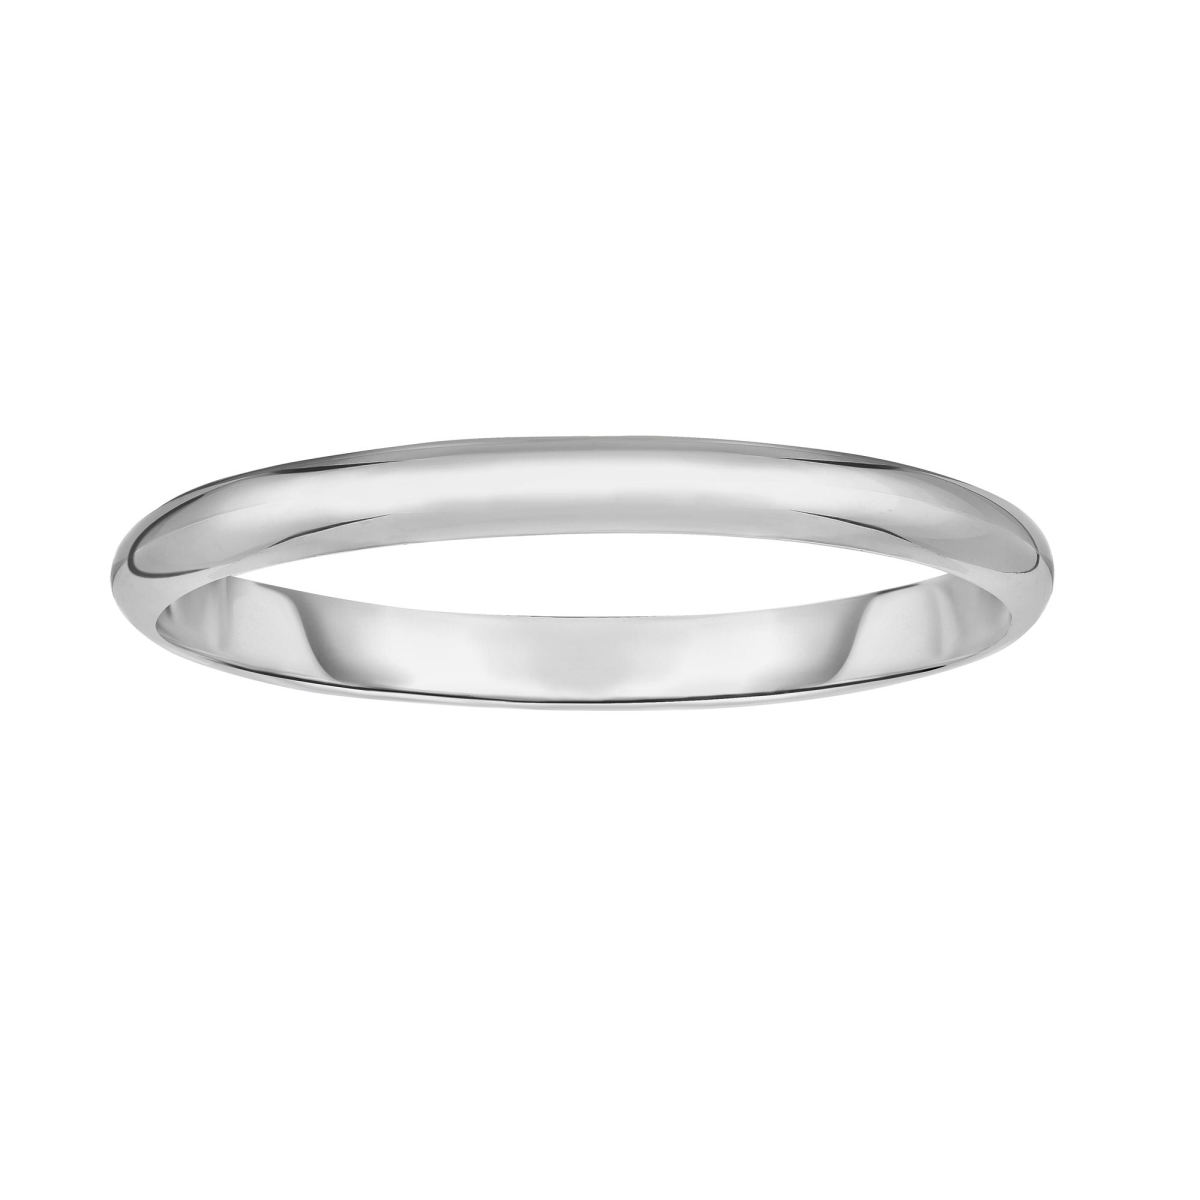 Bagatela 7.5 in. Sterling Silver Polished Bangle with Box & Figure 8 Clasp